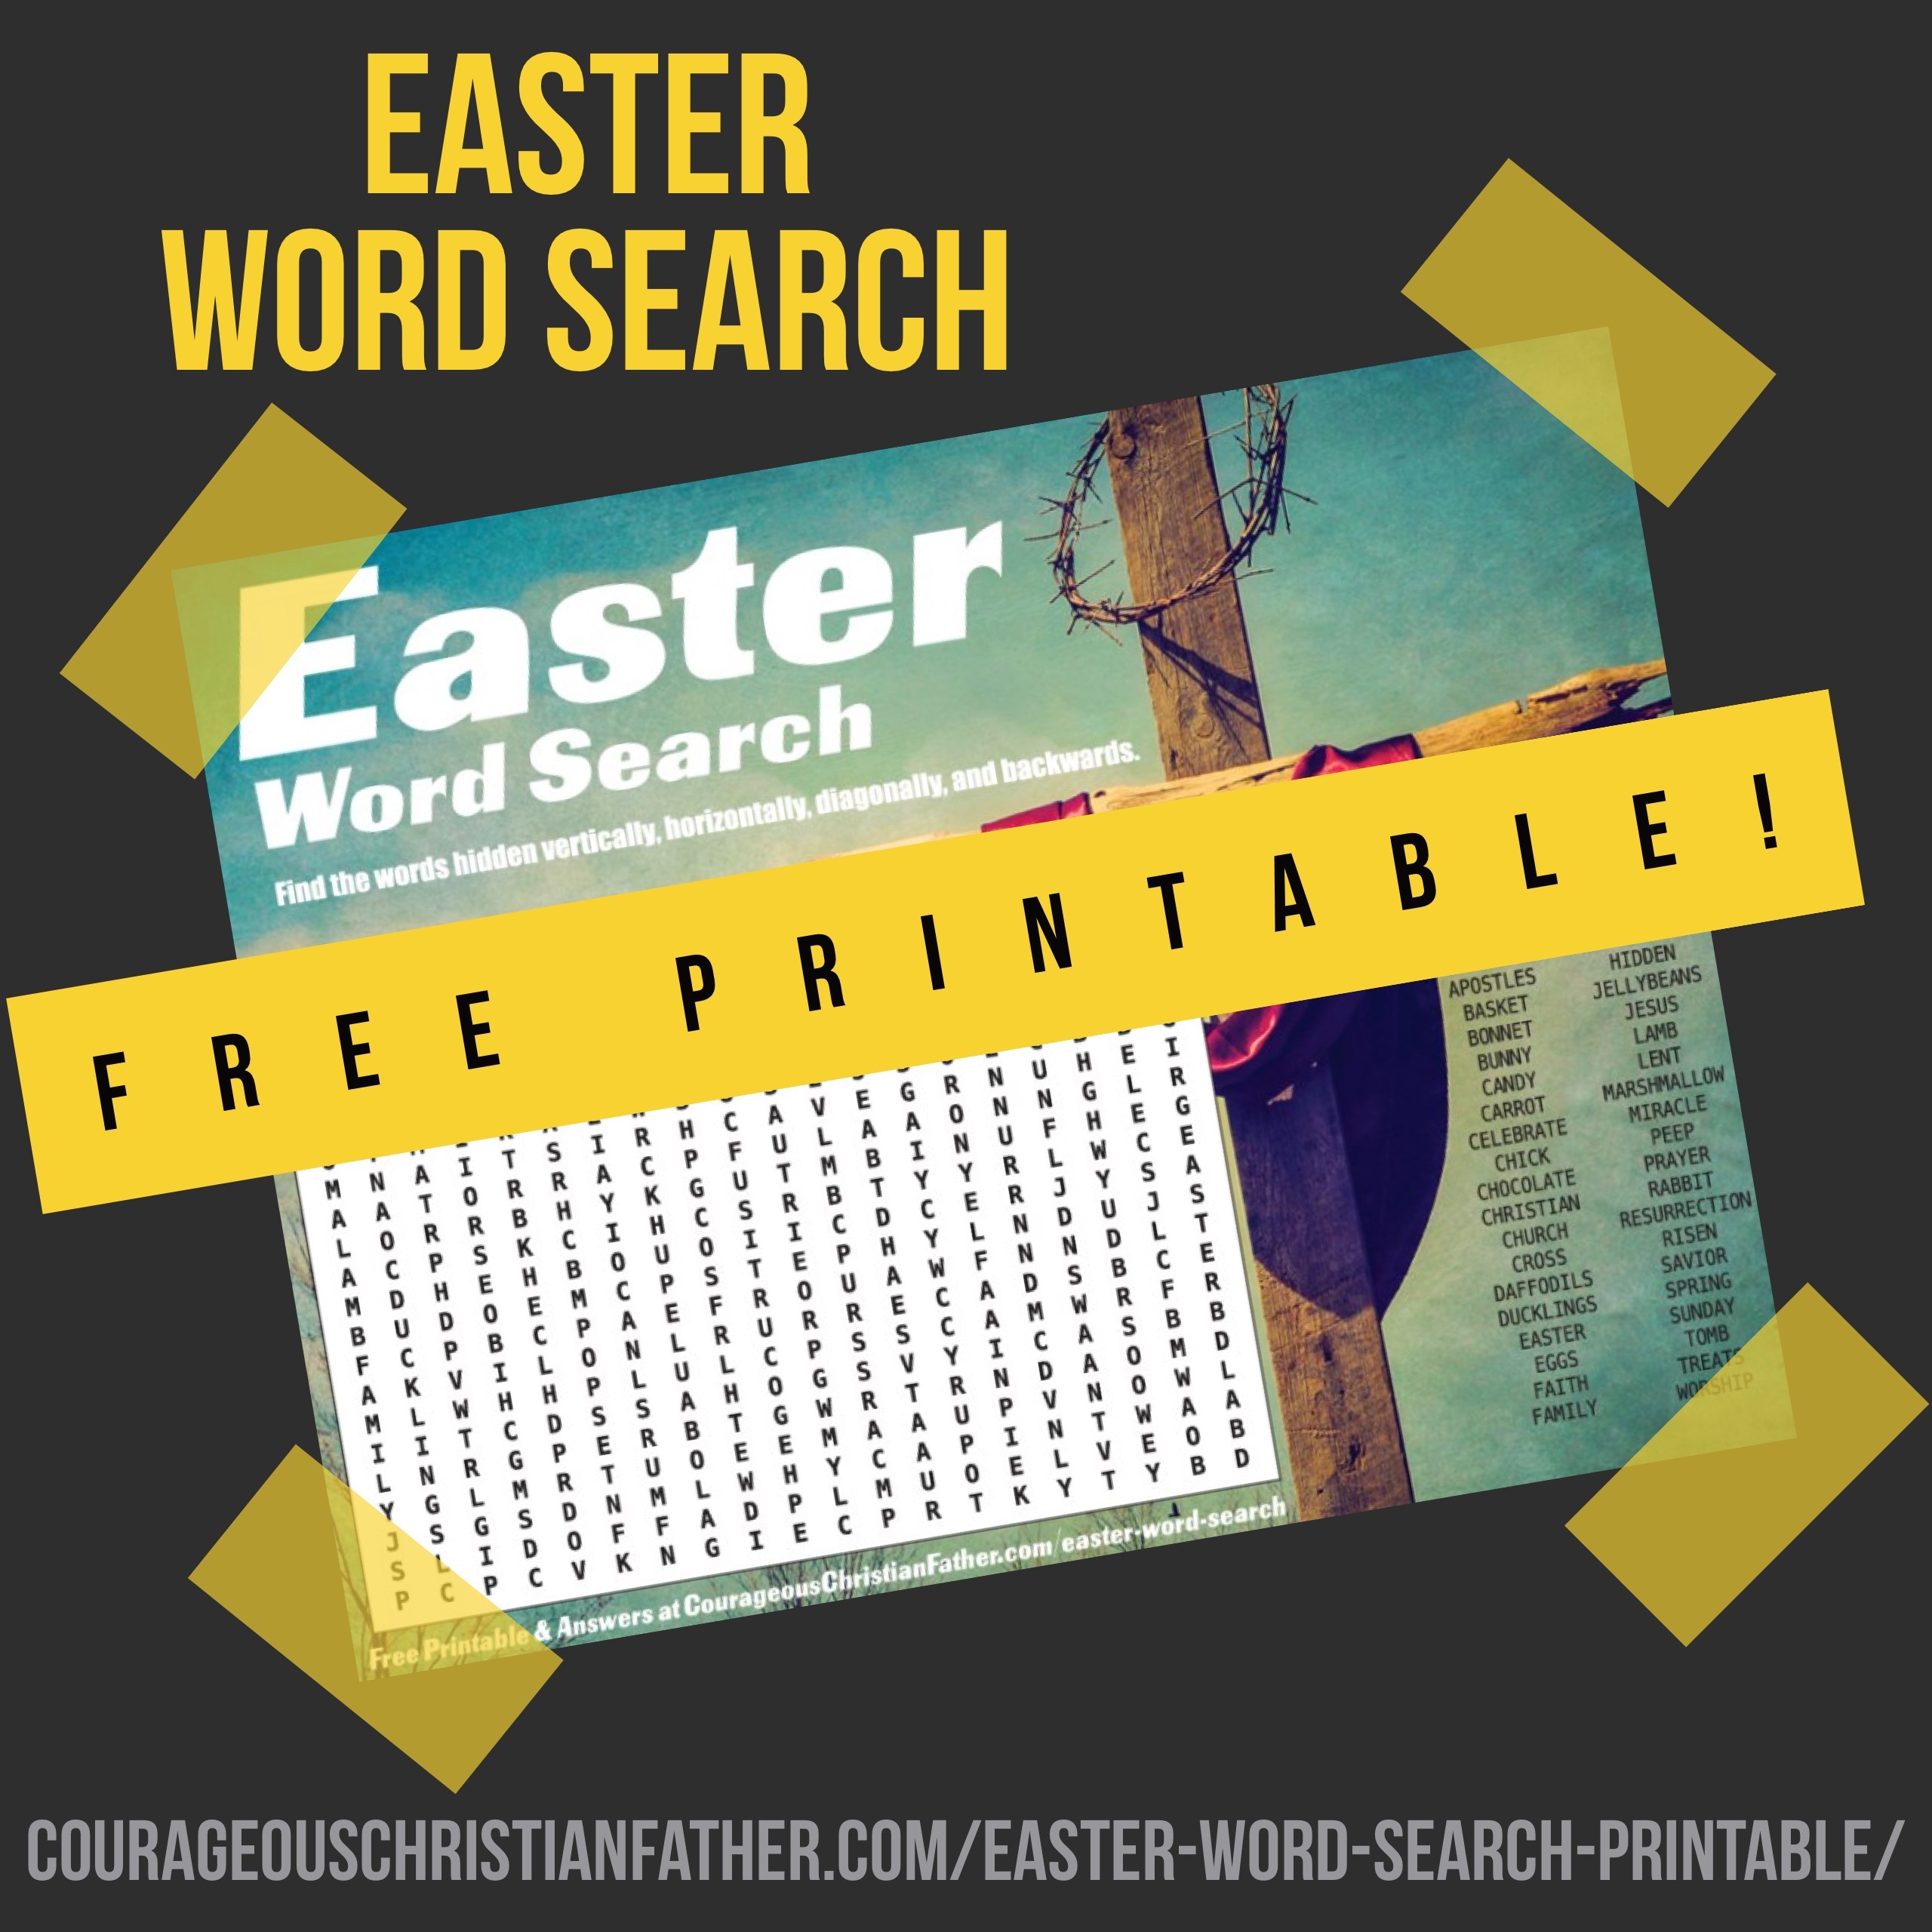 Easter Word Search Printable - A Free download for you to use at home, school, church or anywhere! Find these Easter terms inside this free Easter Printable.